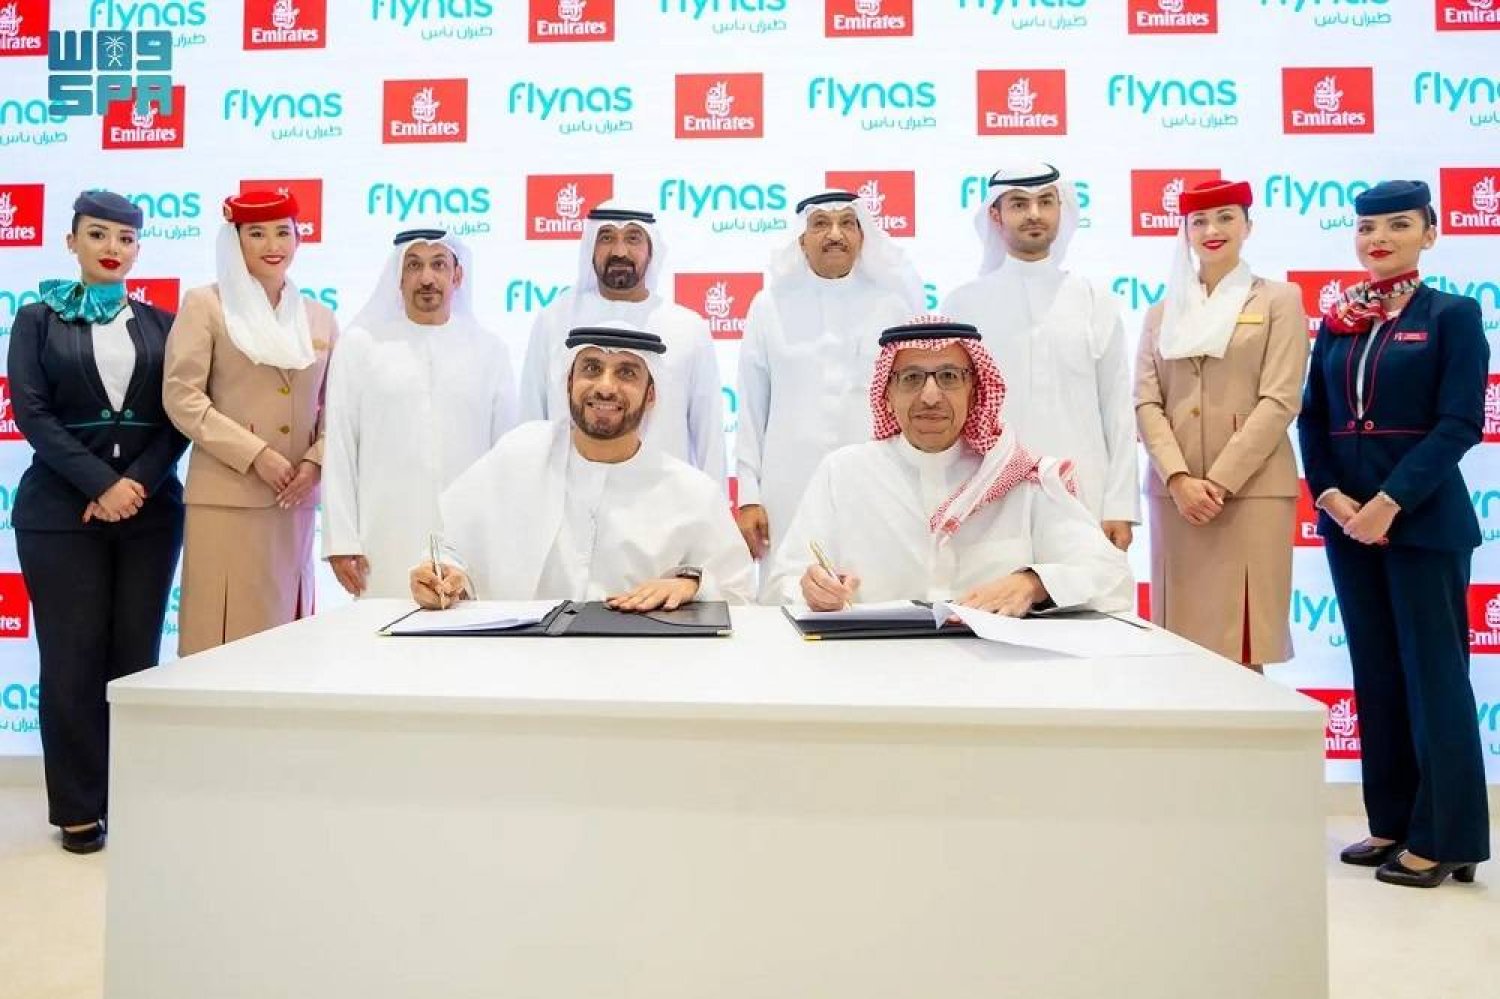 Emirates and Saudi Arabia’s flynas sign an expanded two-way interline partnership with plans to open up connections and more travel choices for flynas customers via Dubai. (SPA)